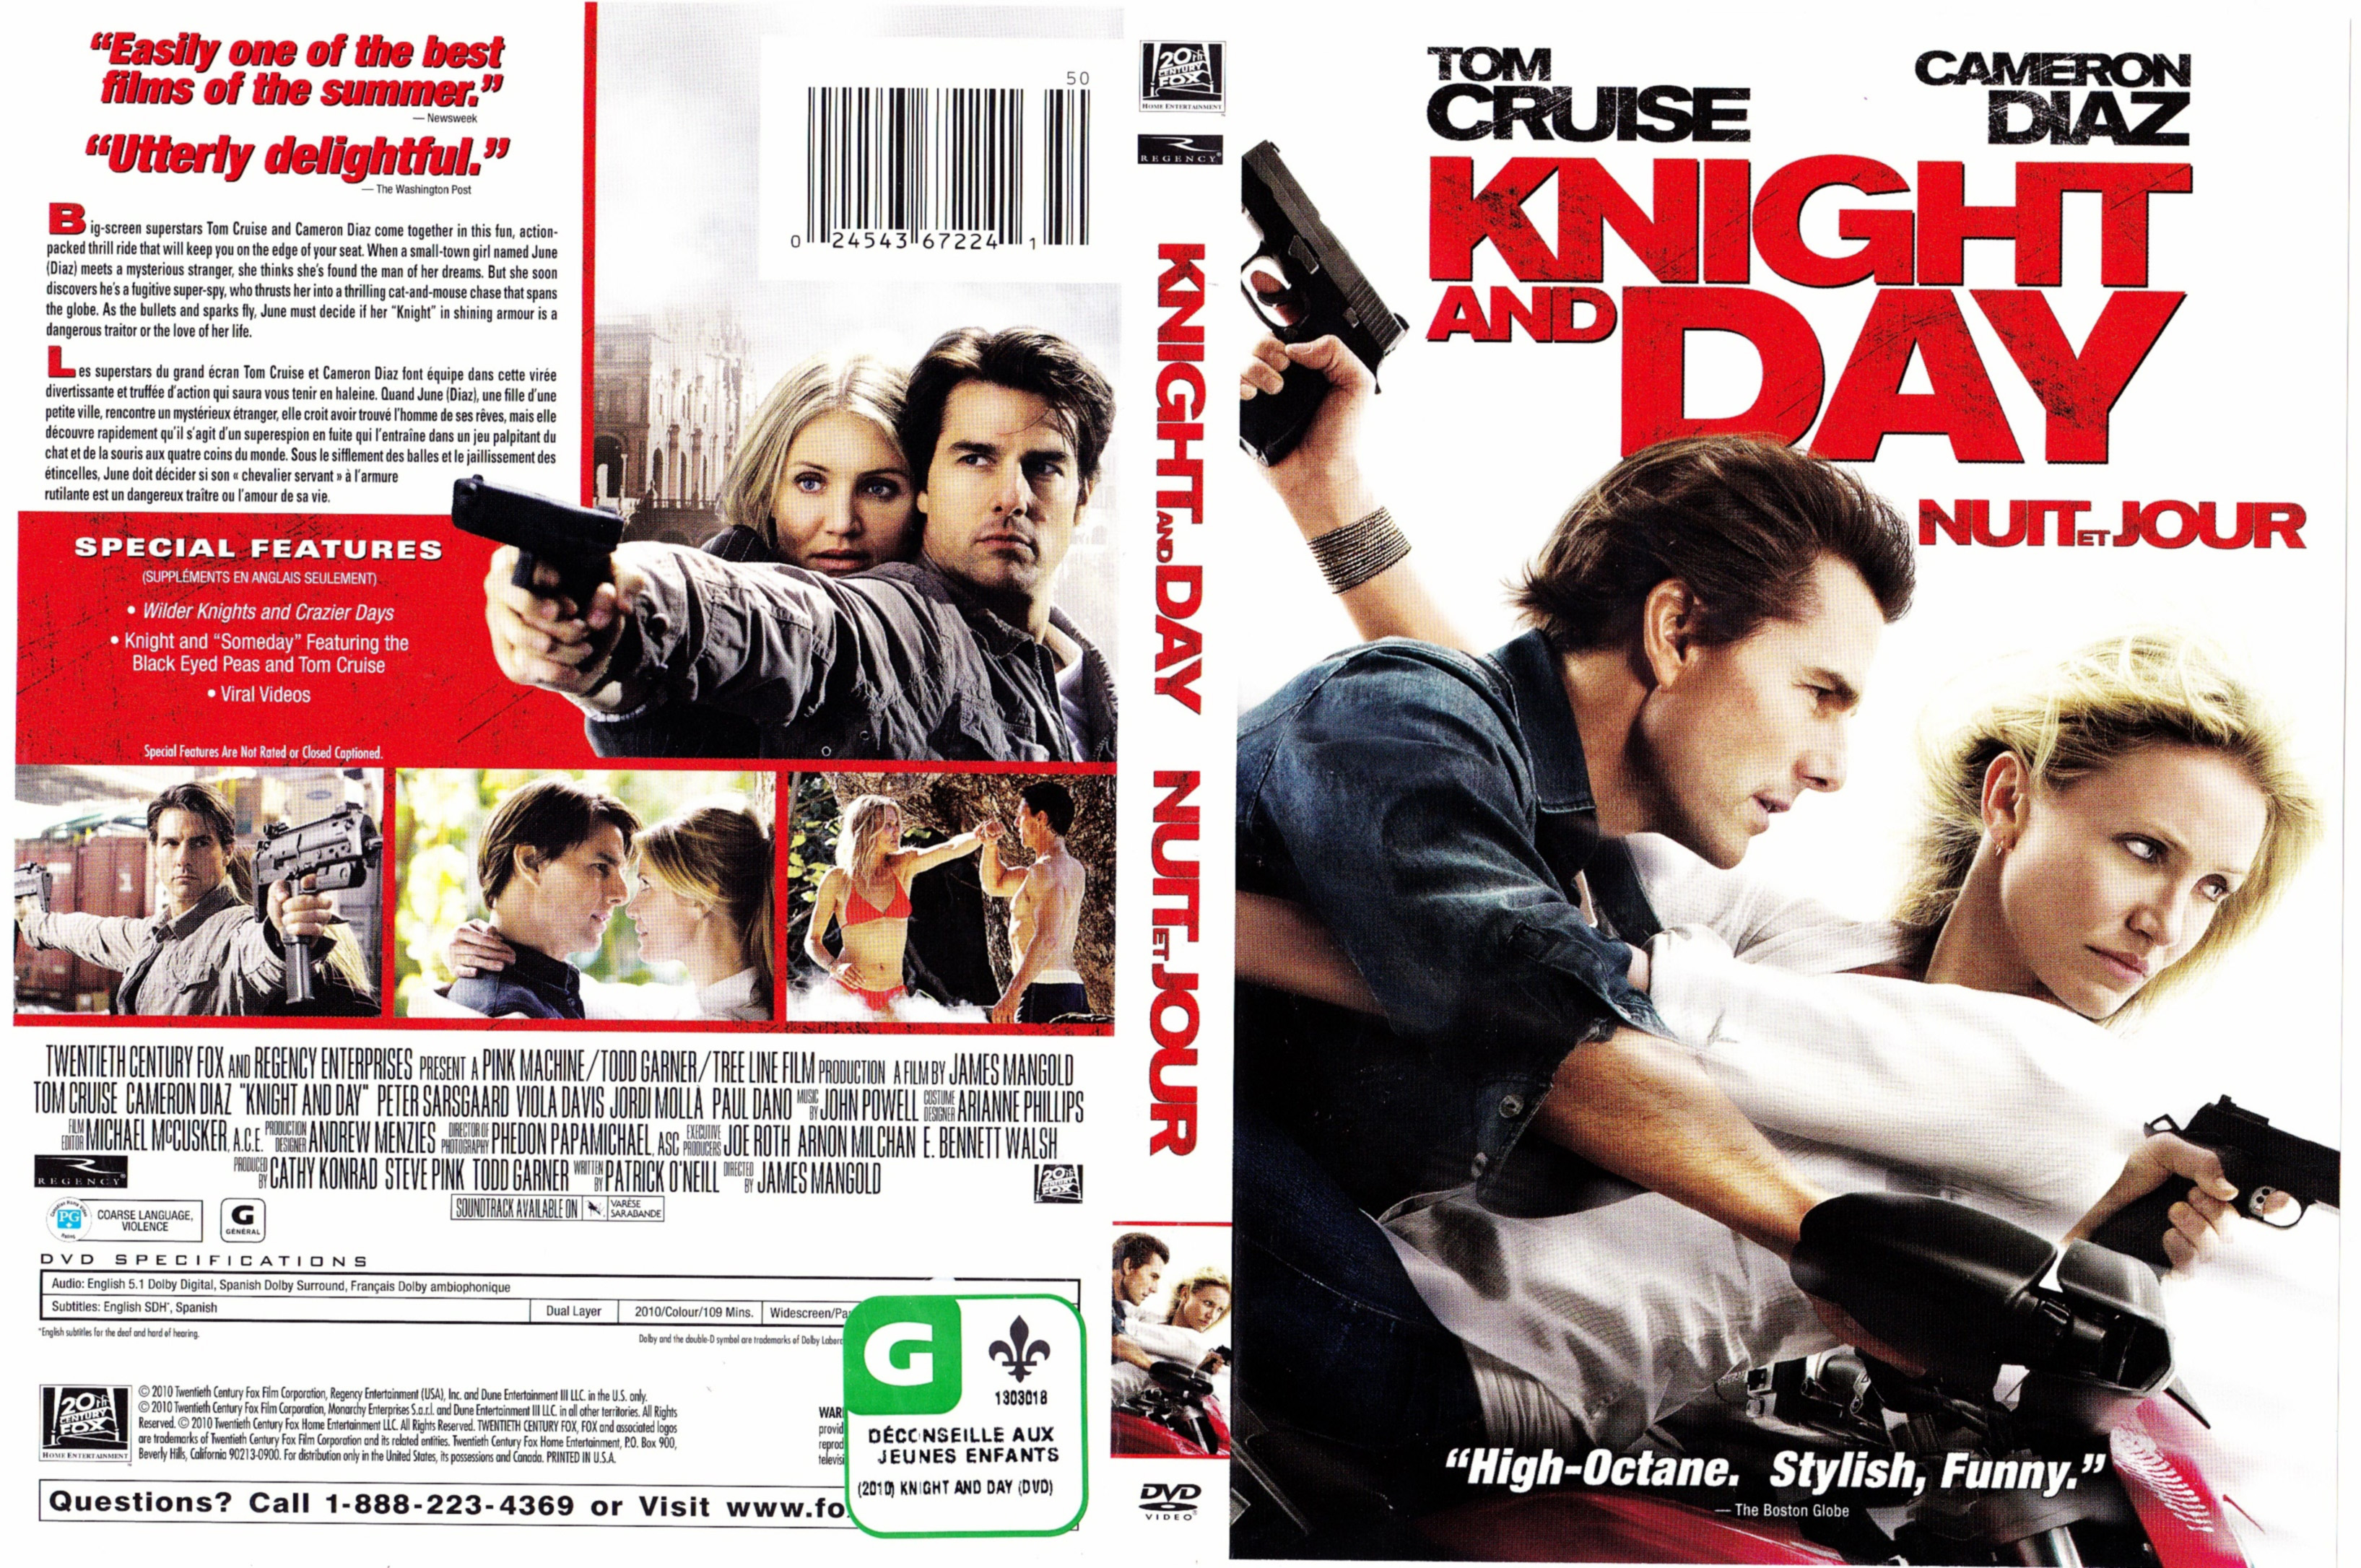 Jaquette DVD Nuit et jour - Knight and day (Canadienne)